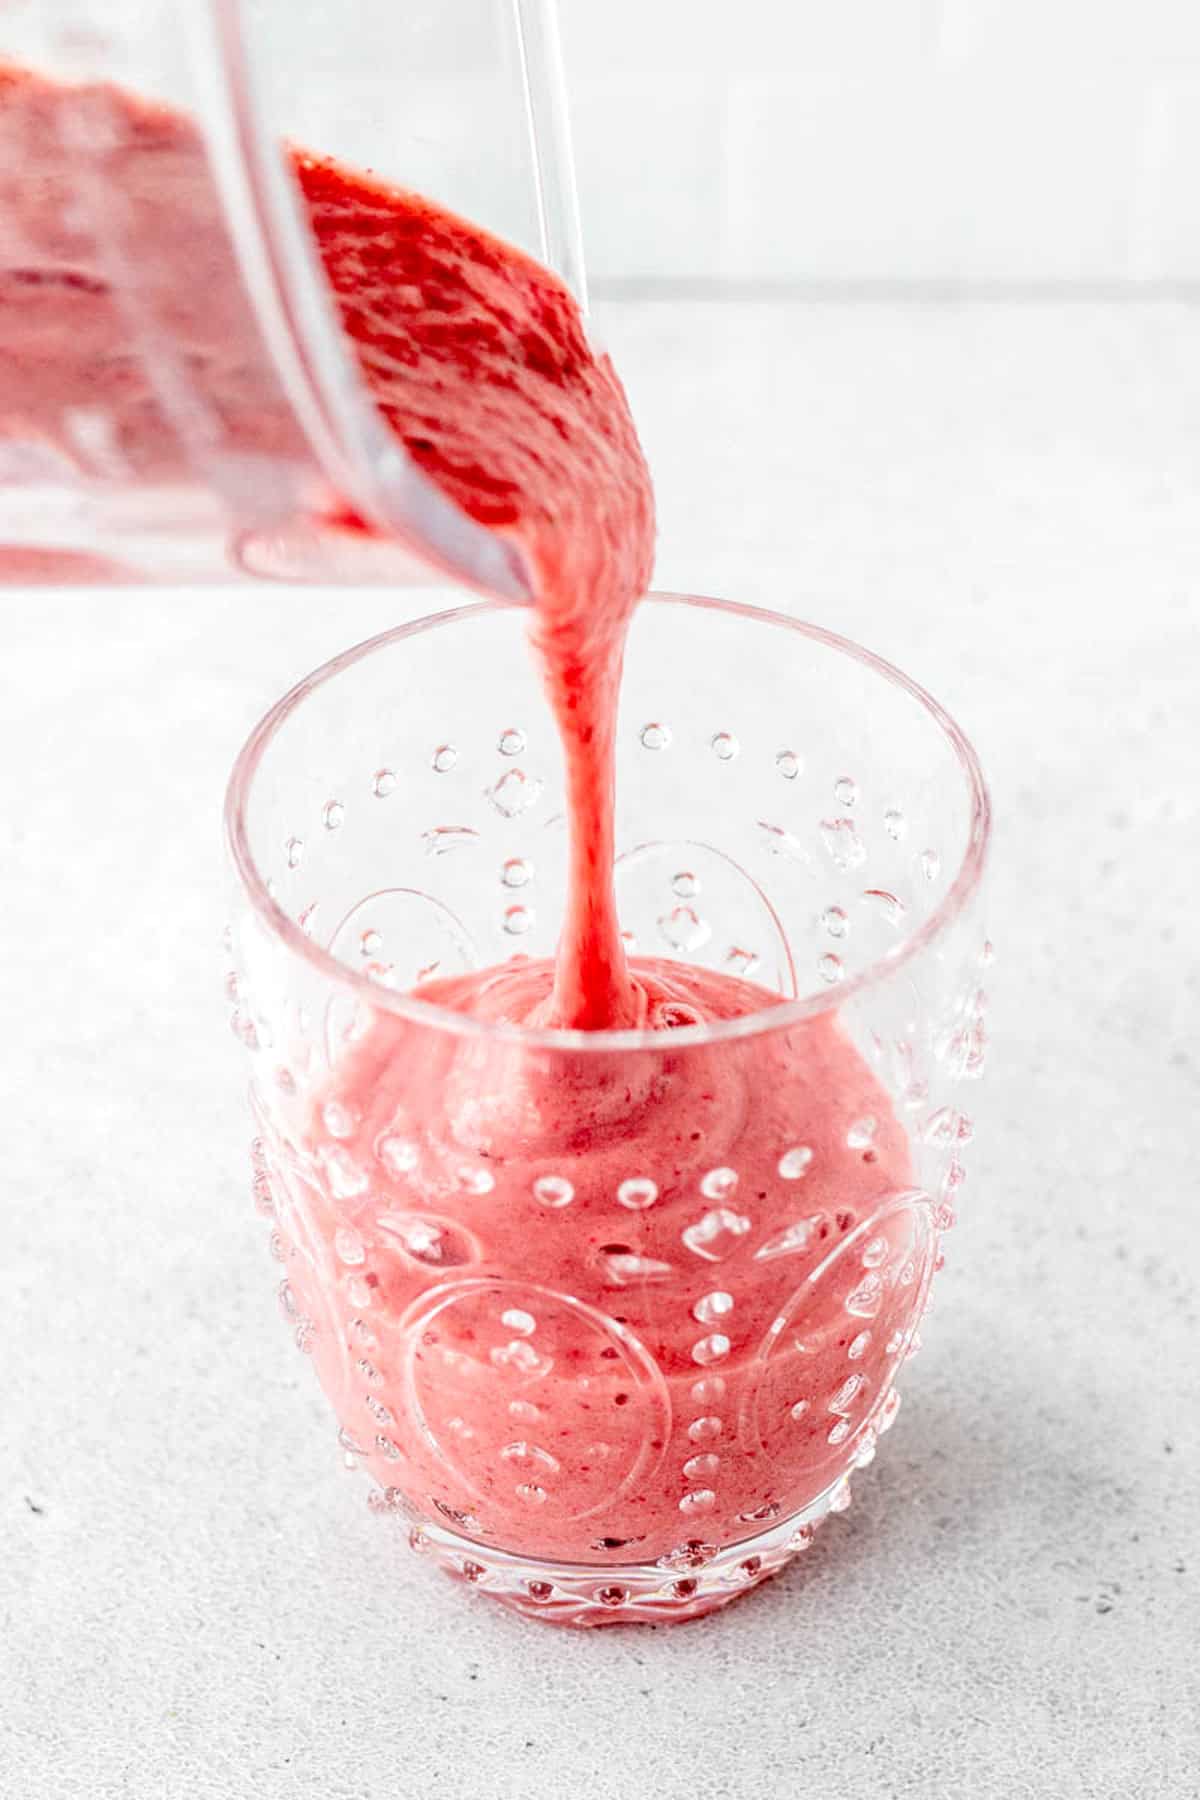 A strawberry and banana smoothie being poured into a glass.